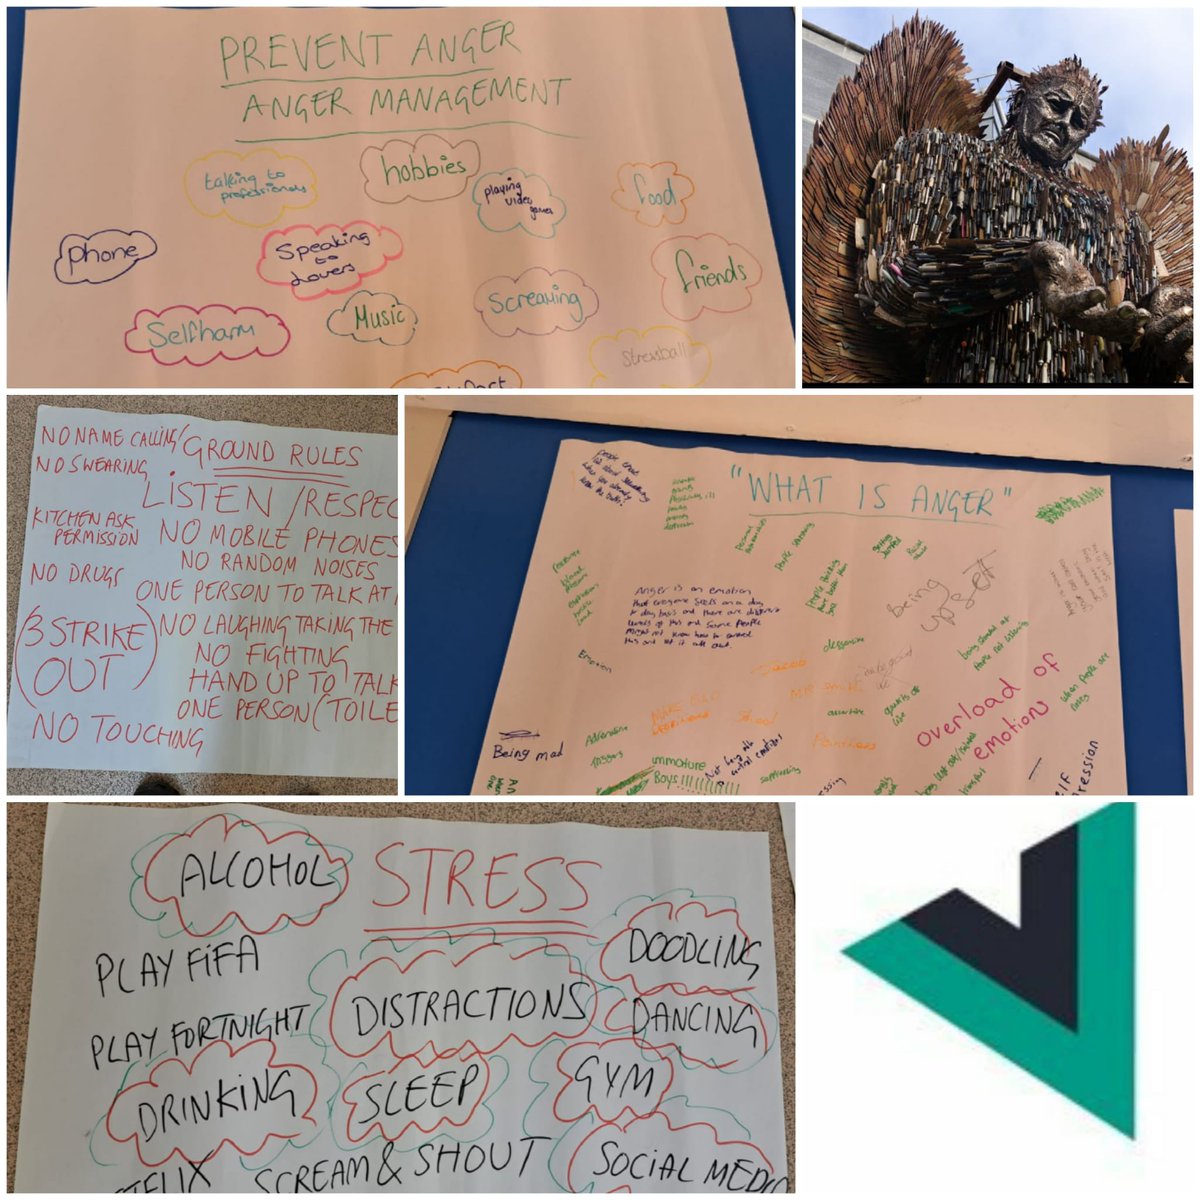 In recent weeks our #InnerEast @wy_vrp provisions have focused on managing #stress & #anger & the links to the #positive or #negative choices we make Super empowering for both #Youngpeople & #Youthworkers to be part of these discussions #LeedsYouthService #ProjectShieldLeeds